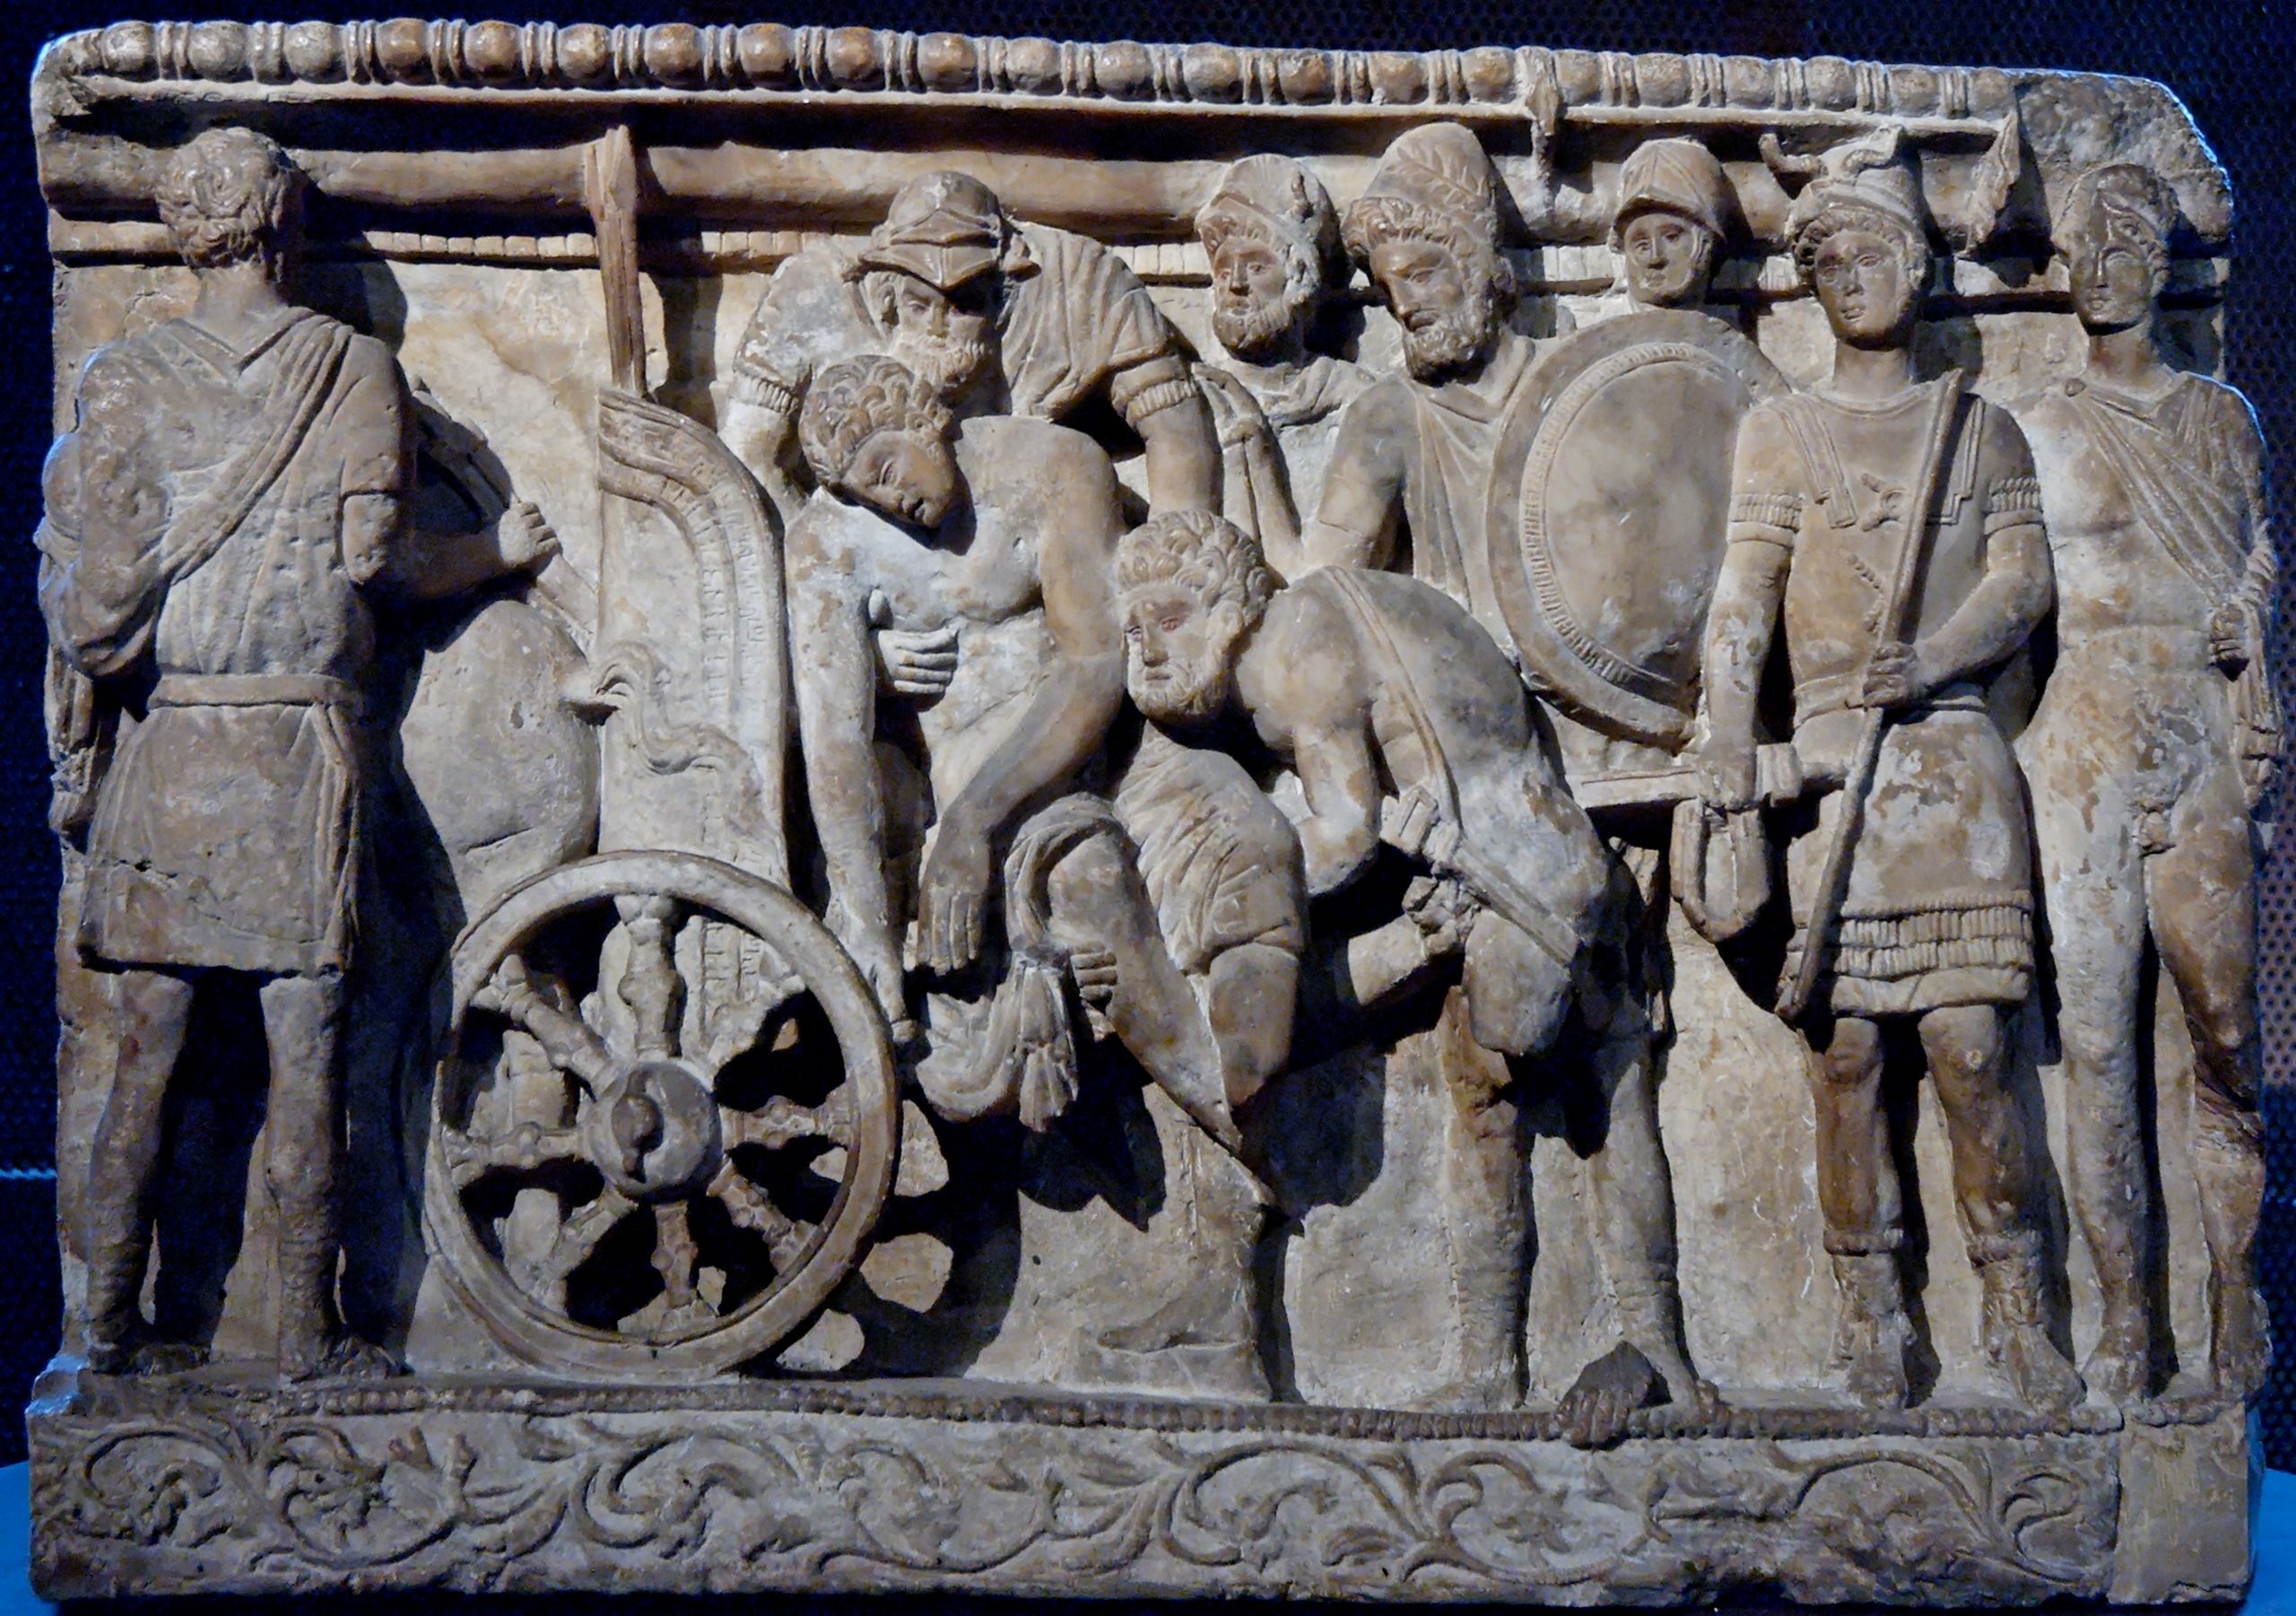 The body of Patroclus is lifted by Menelaus and Meriones while Odysseus and others look on (Etruscan relief, 2nd century BC)